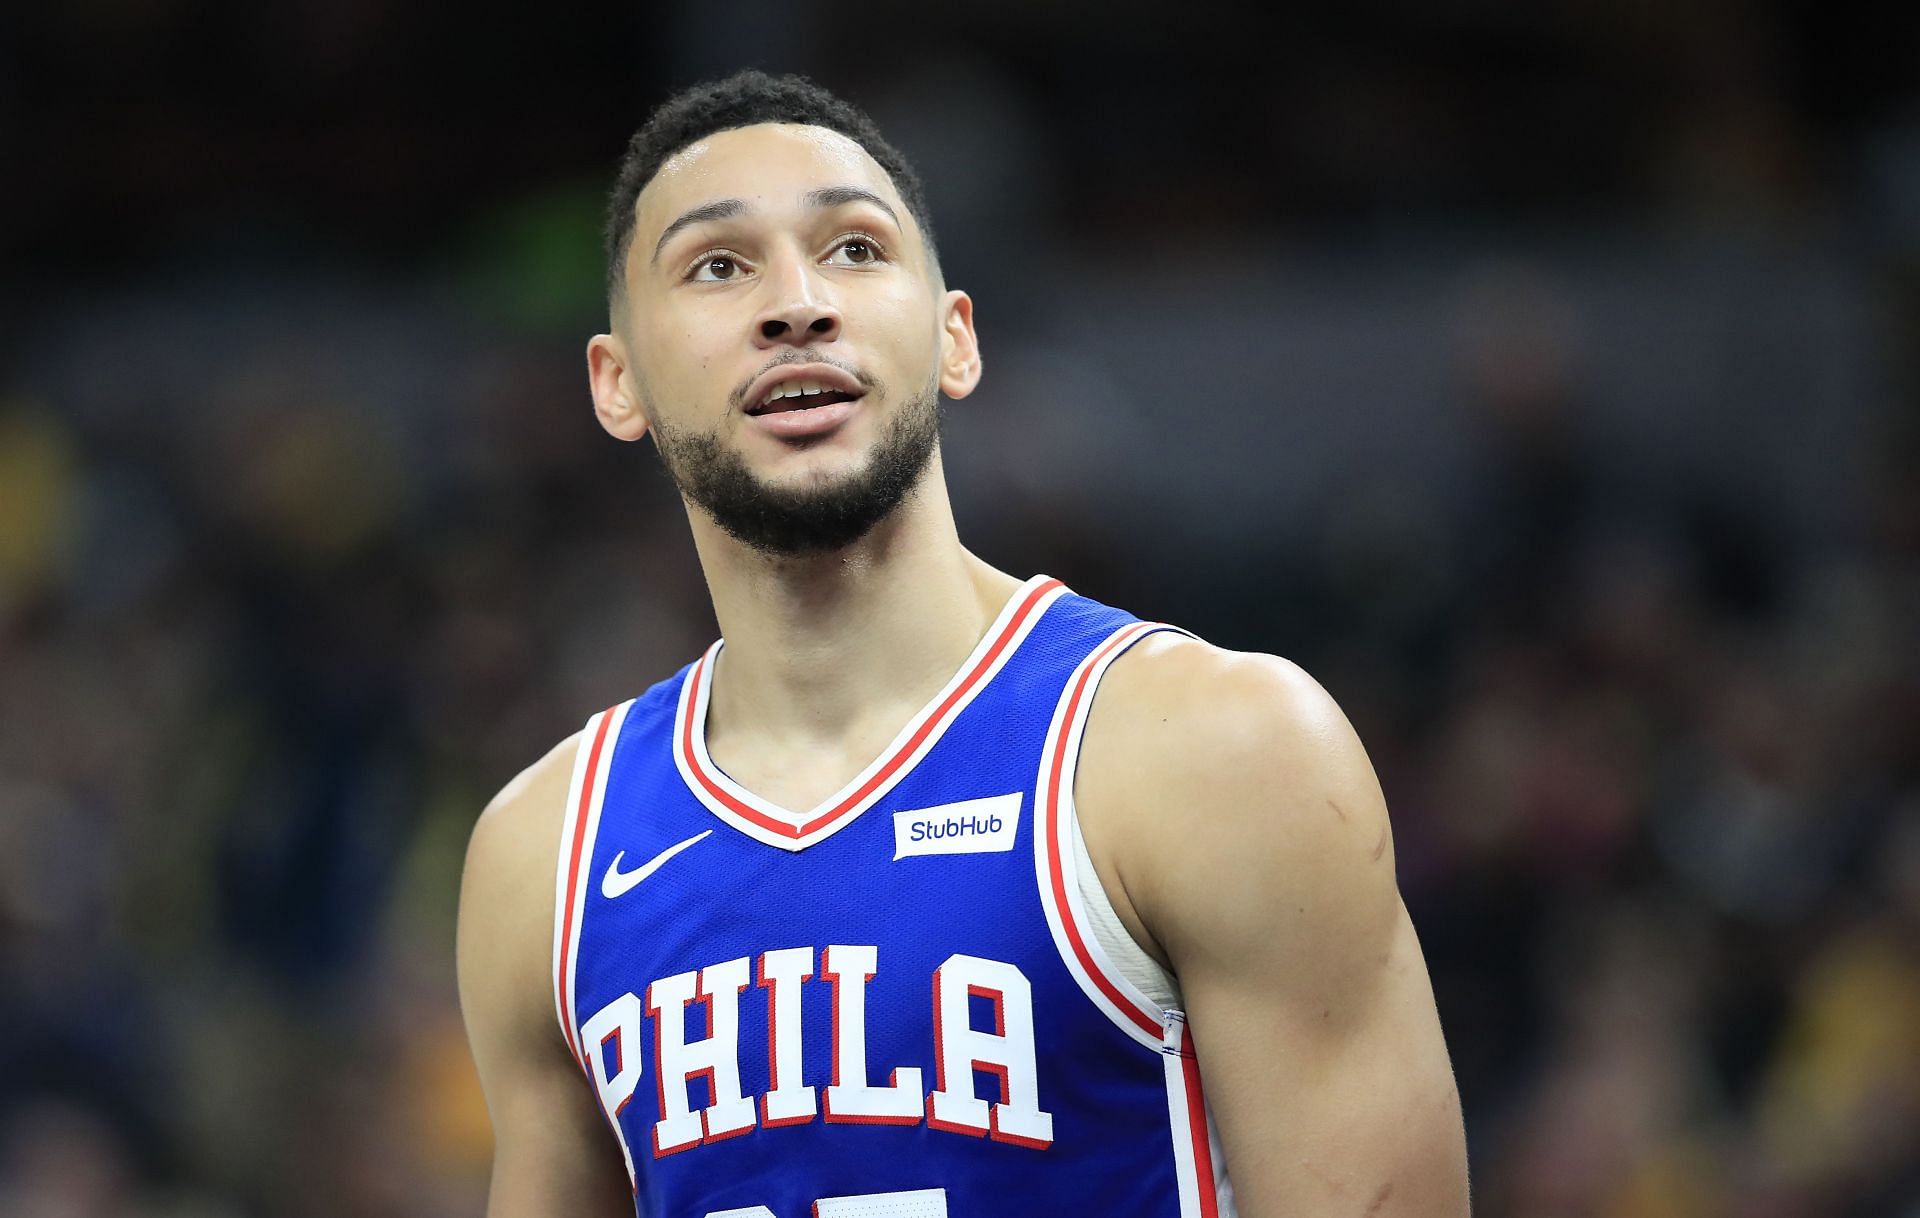 How have Ben Simmons' stats changed since his transition from the